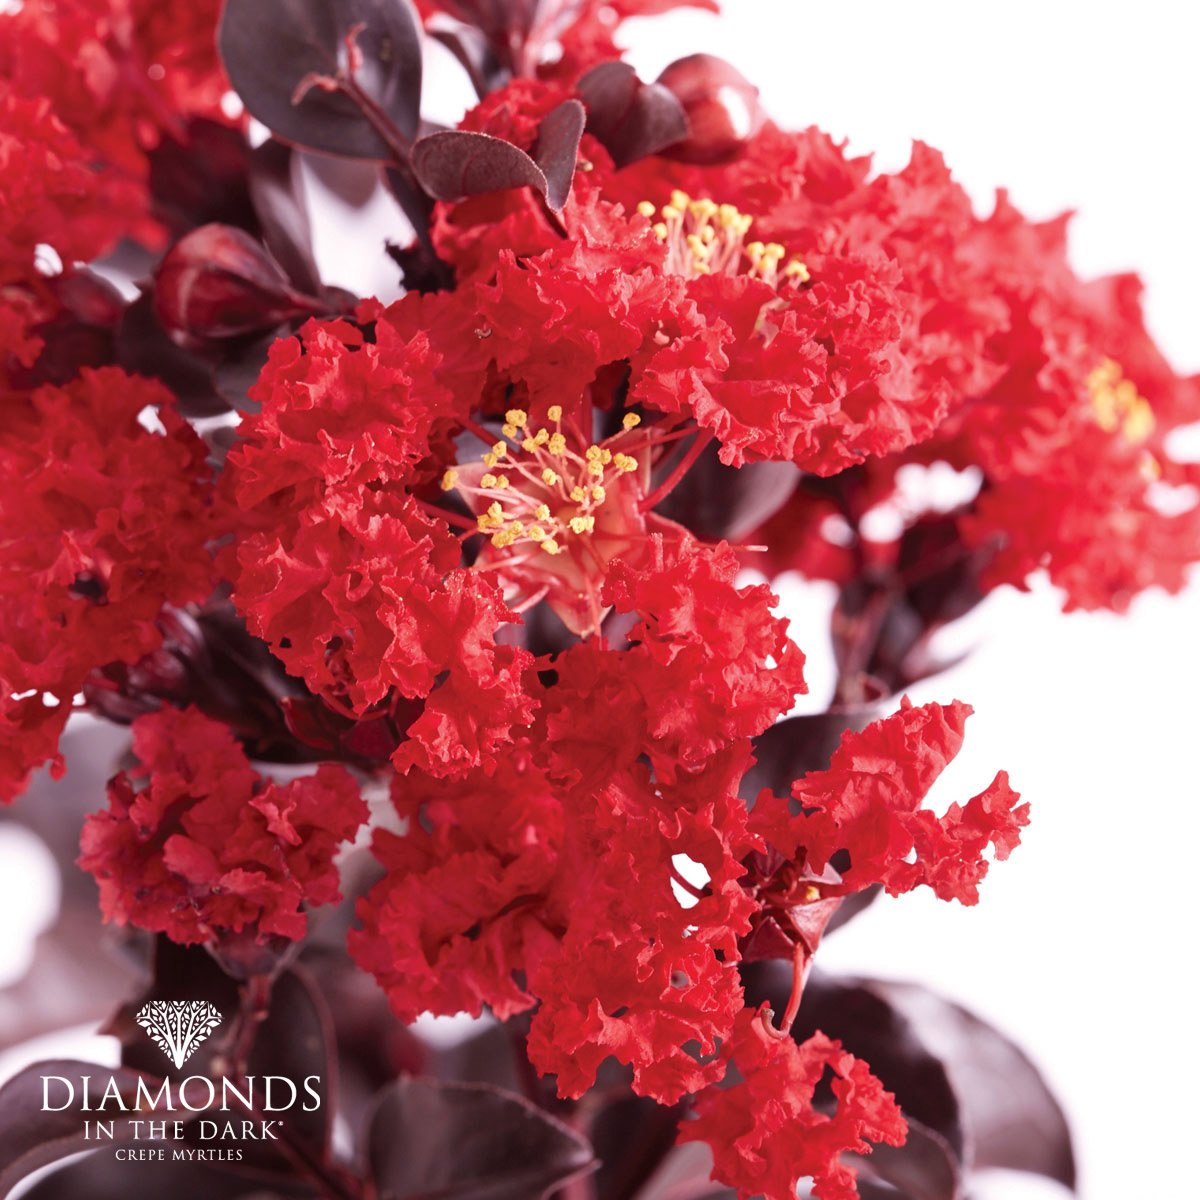 Best Red features flawless near-black foliage that emerges in early Spring, followed by masses of vivid red blooms